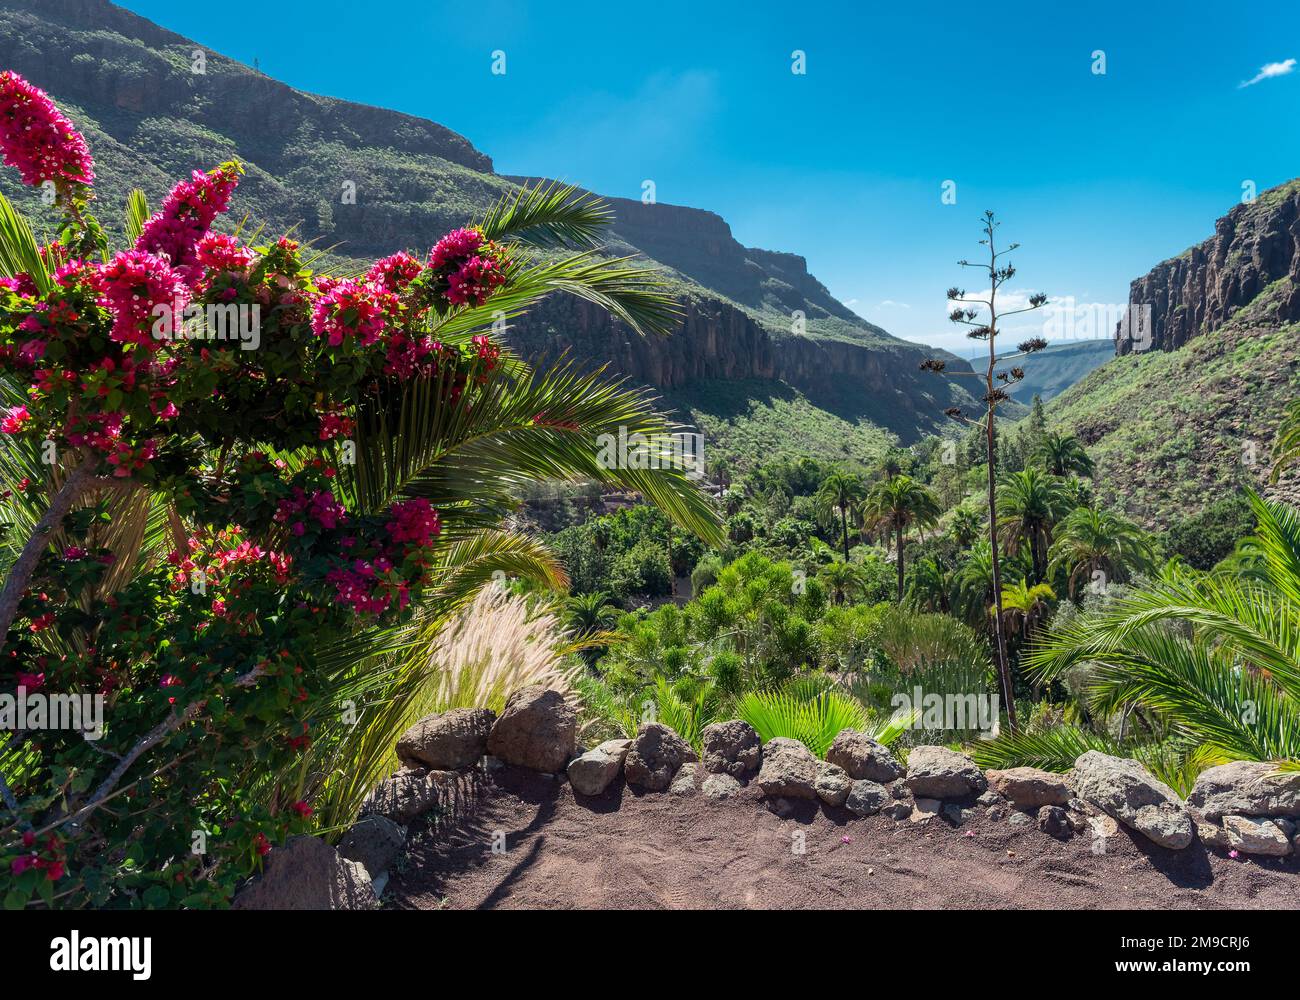 View of the tropical forest and nature, with red flowers and green vegetation on top of mountains in Las Palmas de Gran Canaria island in the summertime Stock Photo